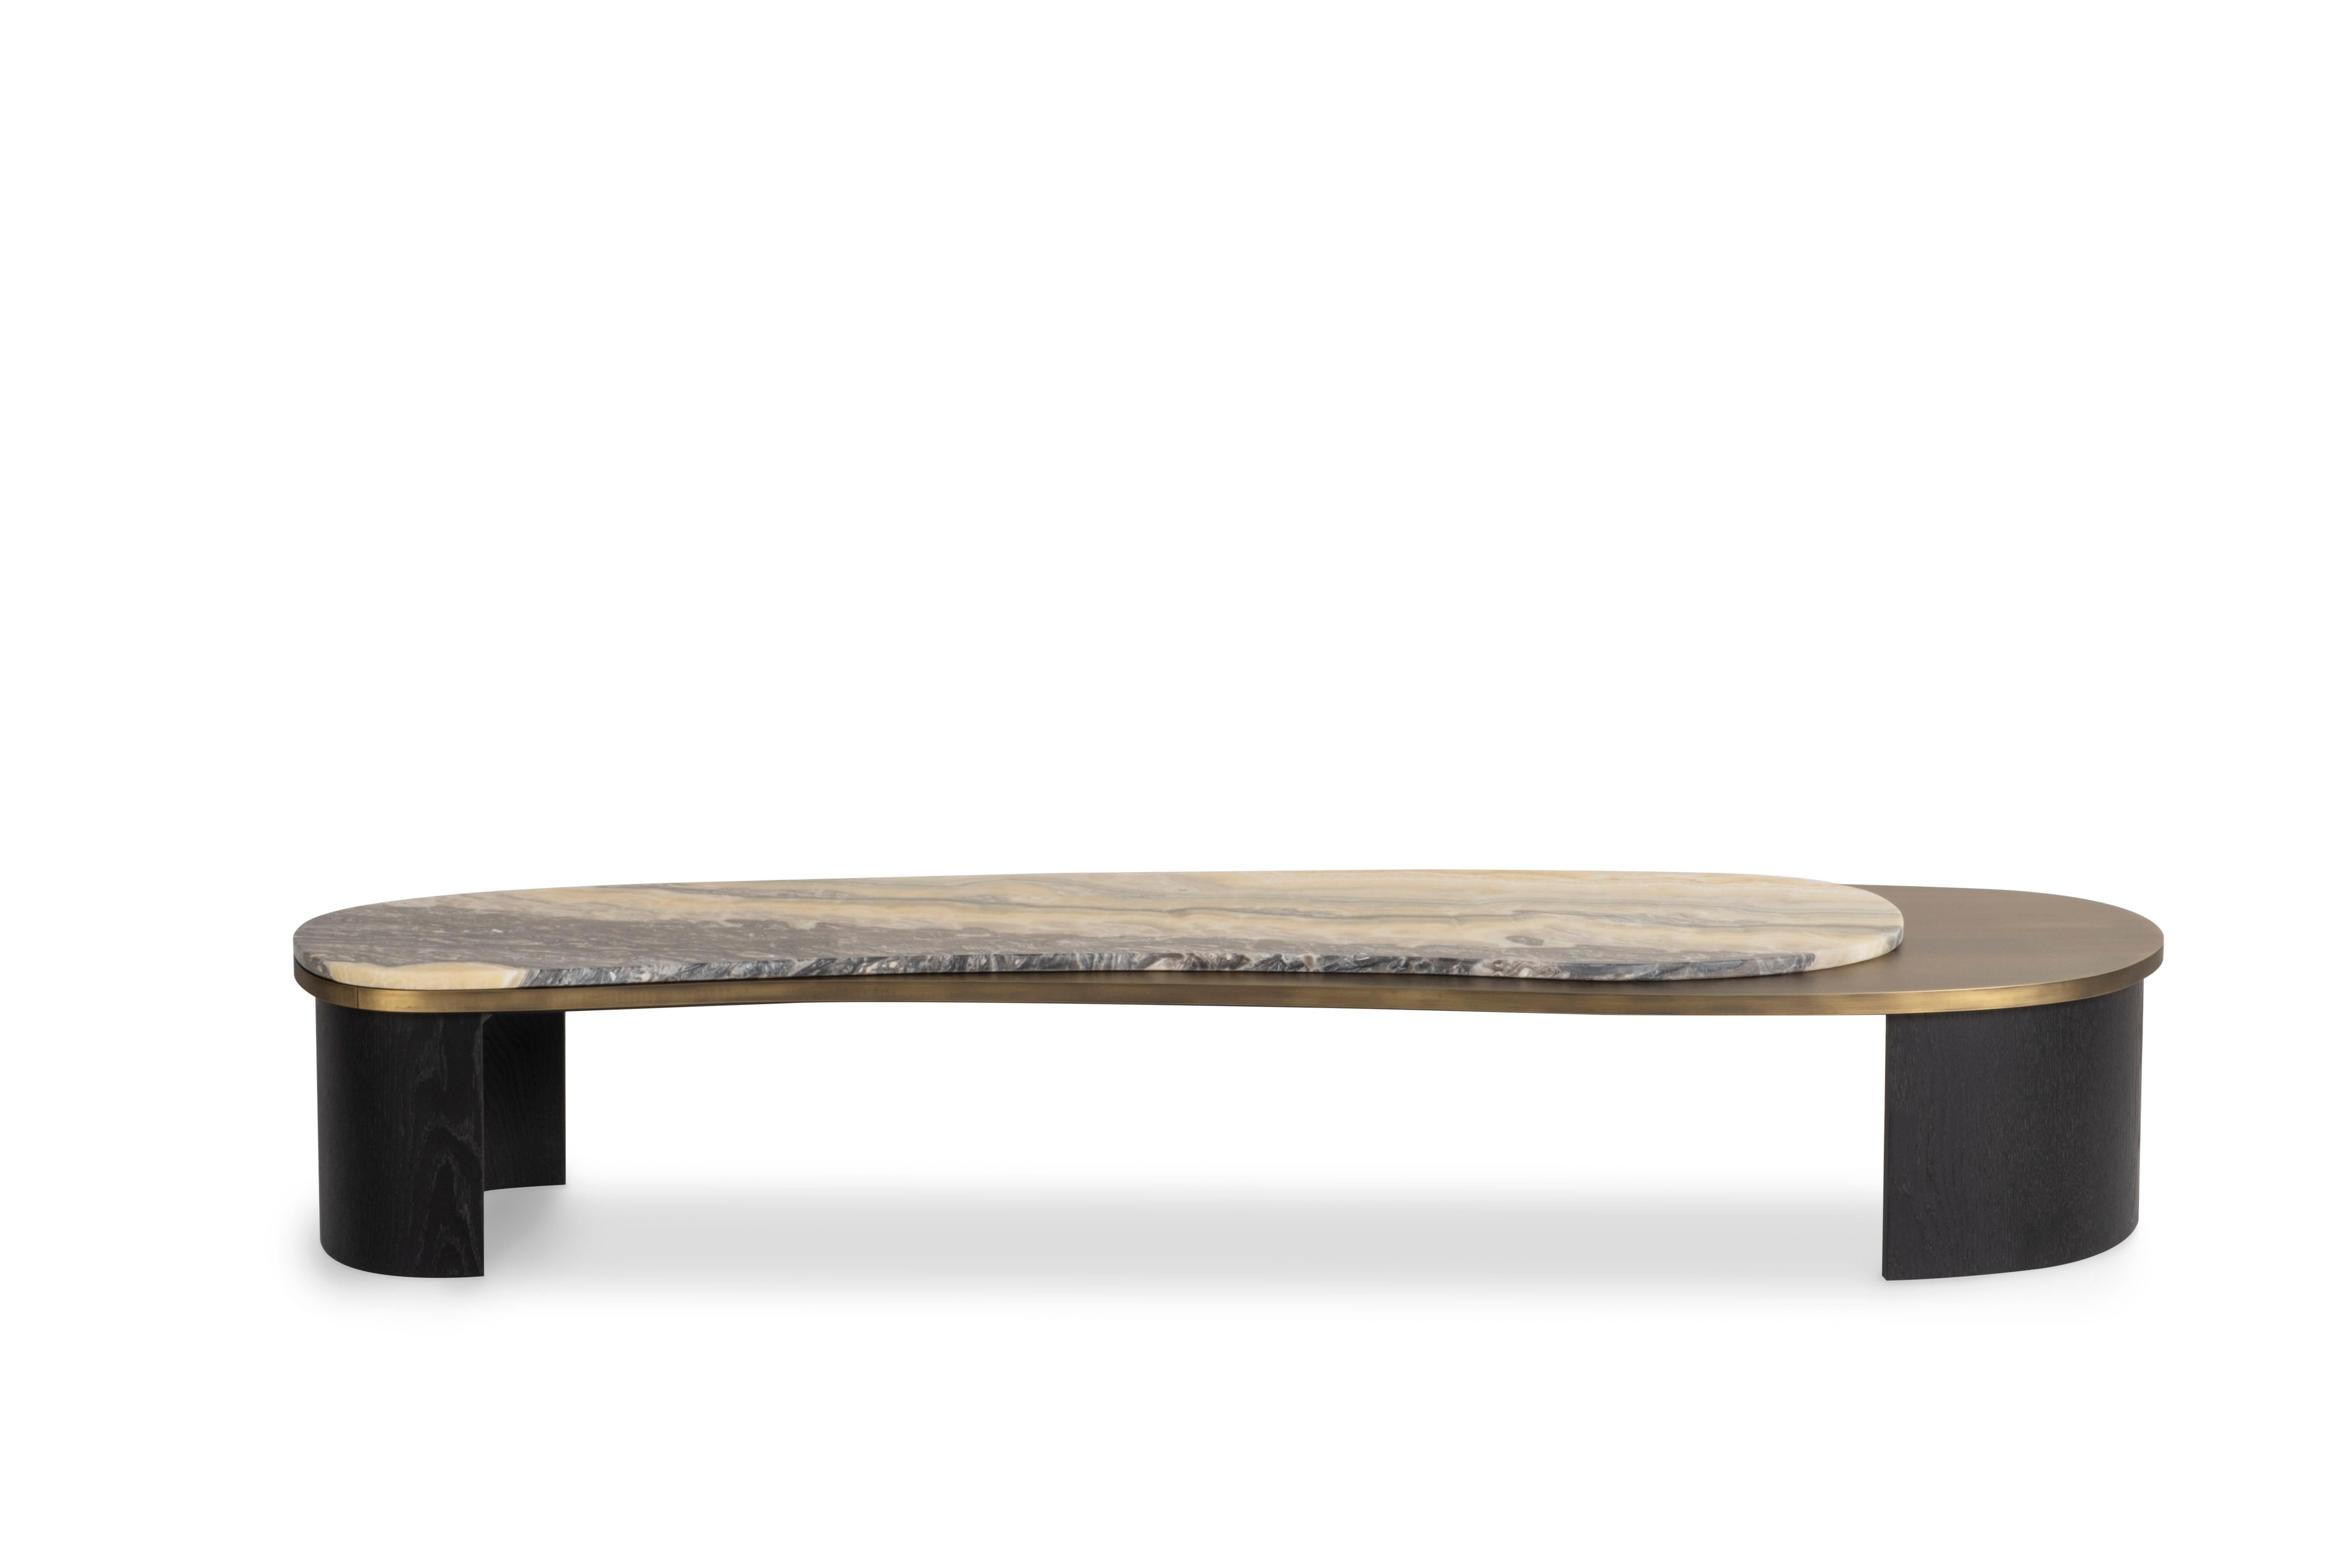 Portuguese Modern Armona Coffee Table, Onyx Brass, Handmade in Portugal by Greenapple For Sale